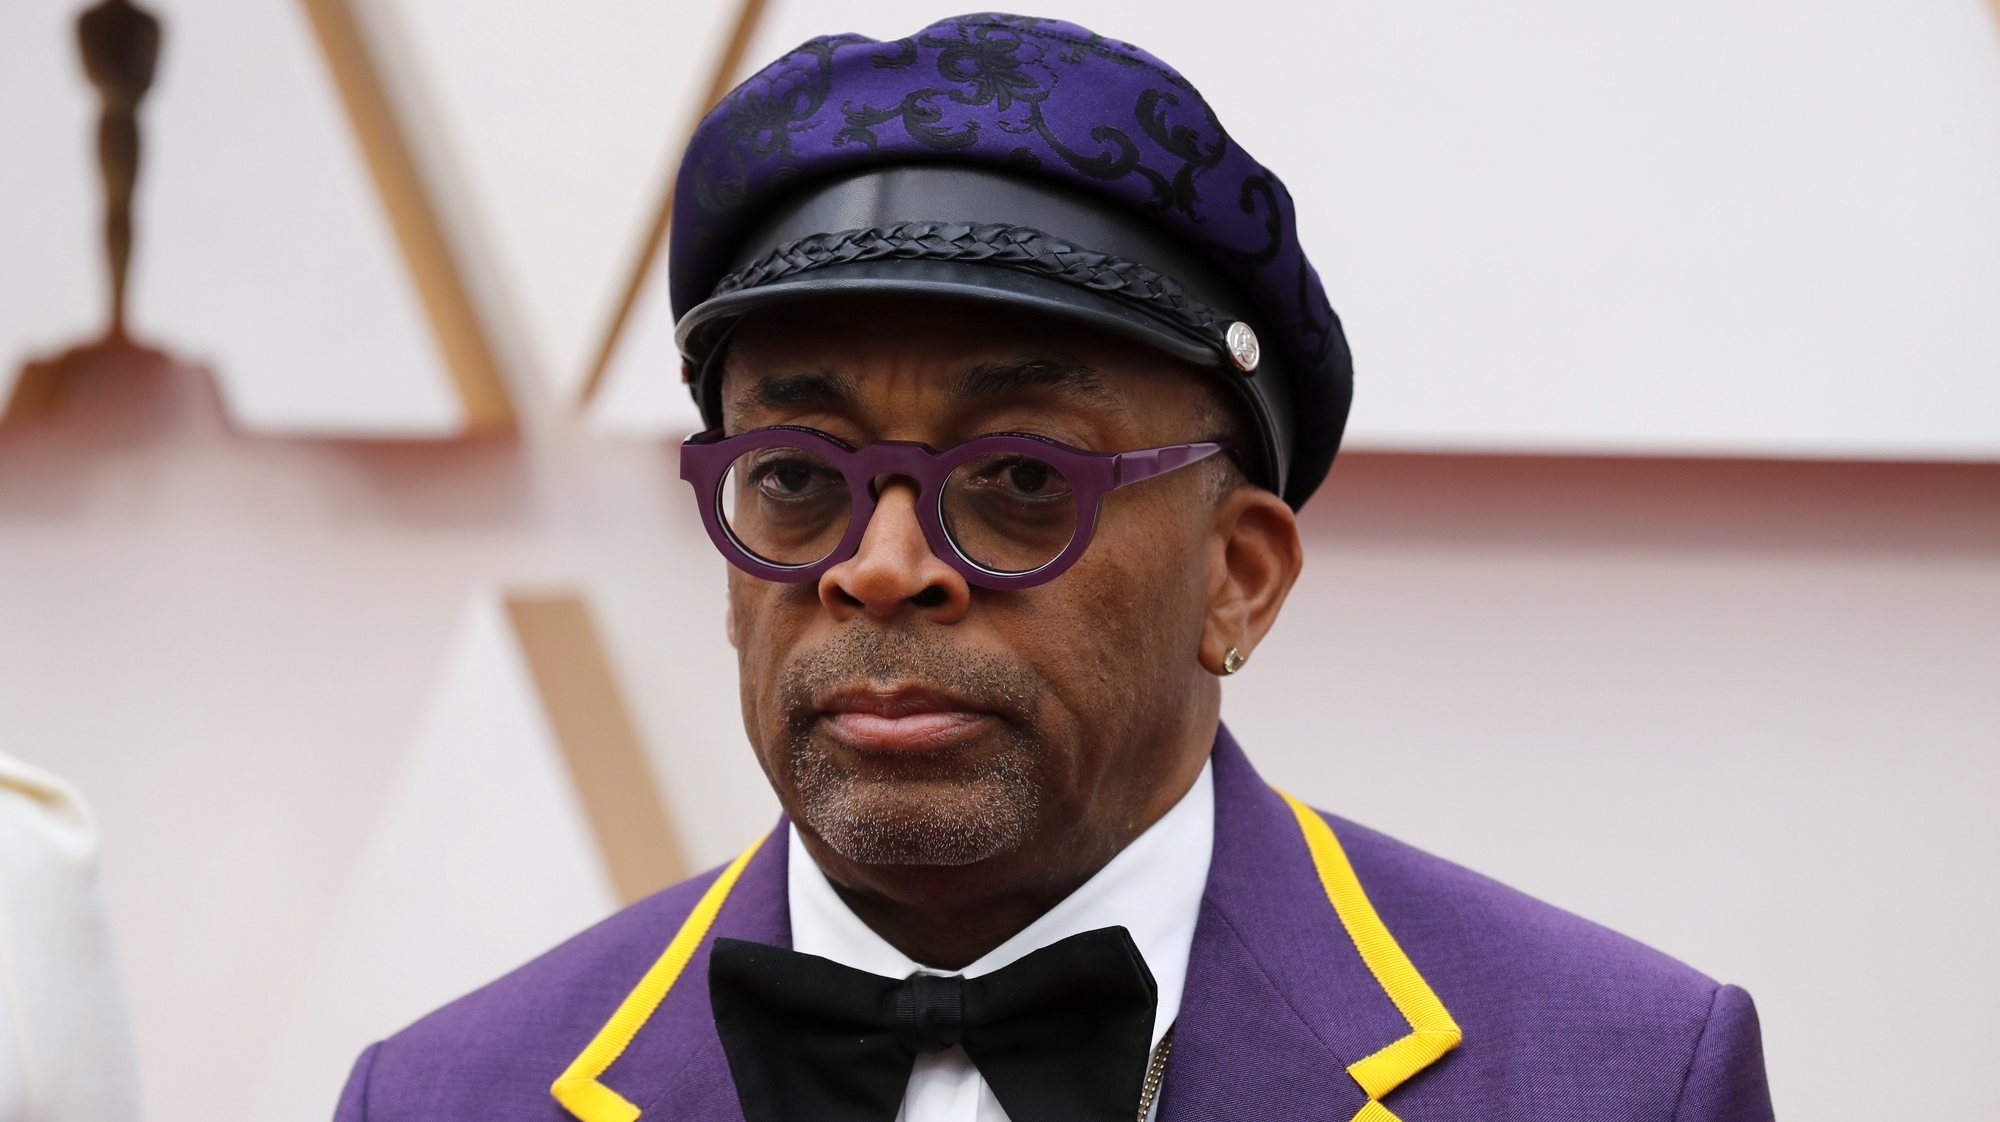 epa08206982 Spike Lee arrives for the 92nd annual Academy Awards ceremony at the Dolby Theatre in Hollywood, California, USA, 09 February 2020. The Oscars are presented for outstanding individual or collective efforts in filmmaking in 24 categories.  EPA/DAVID SWANSON